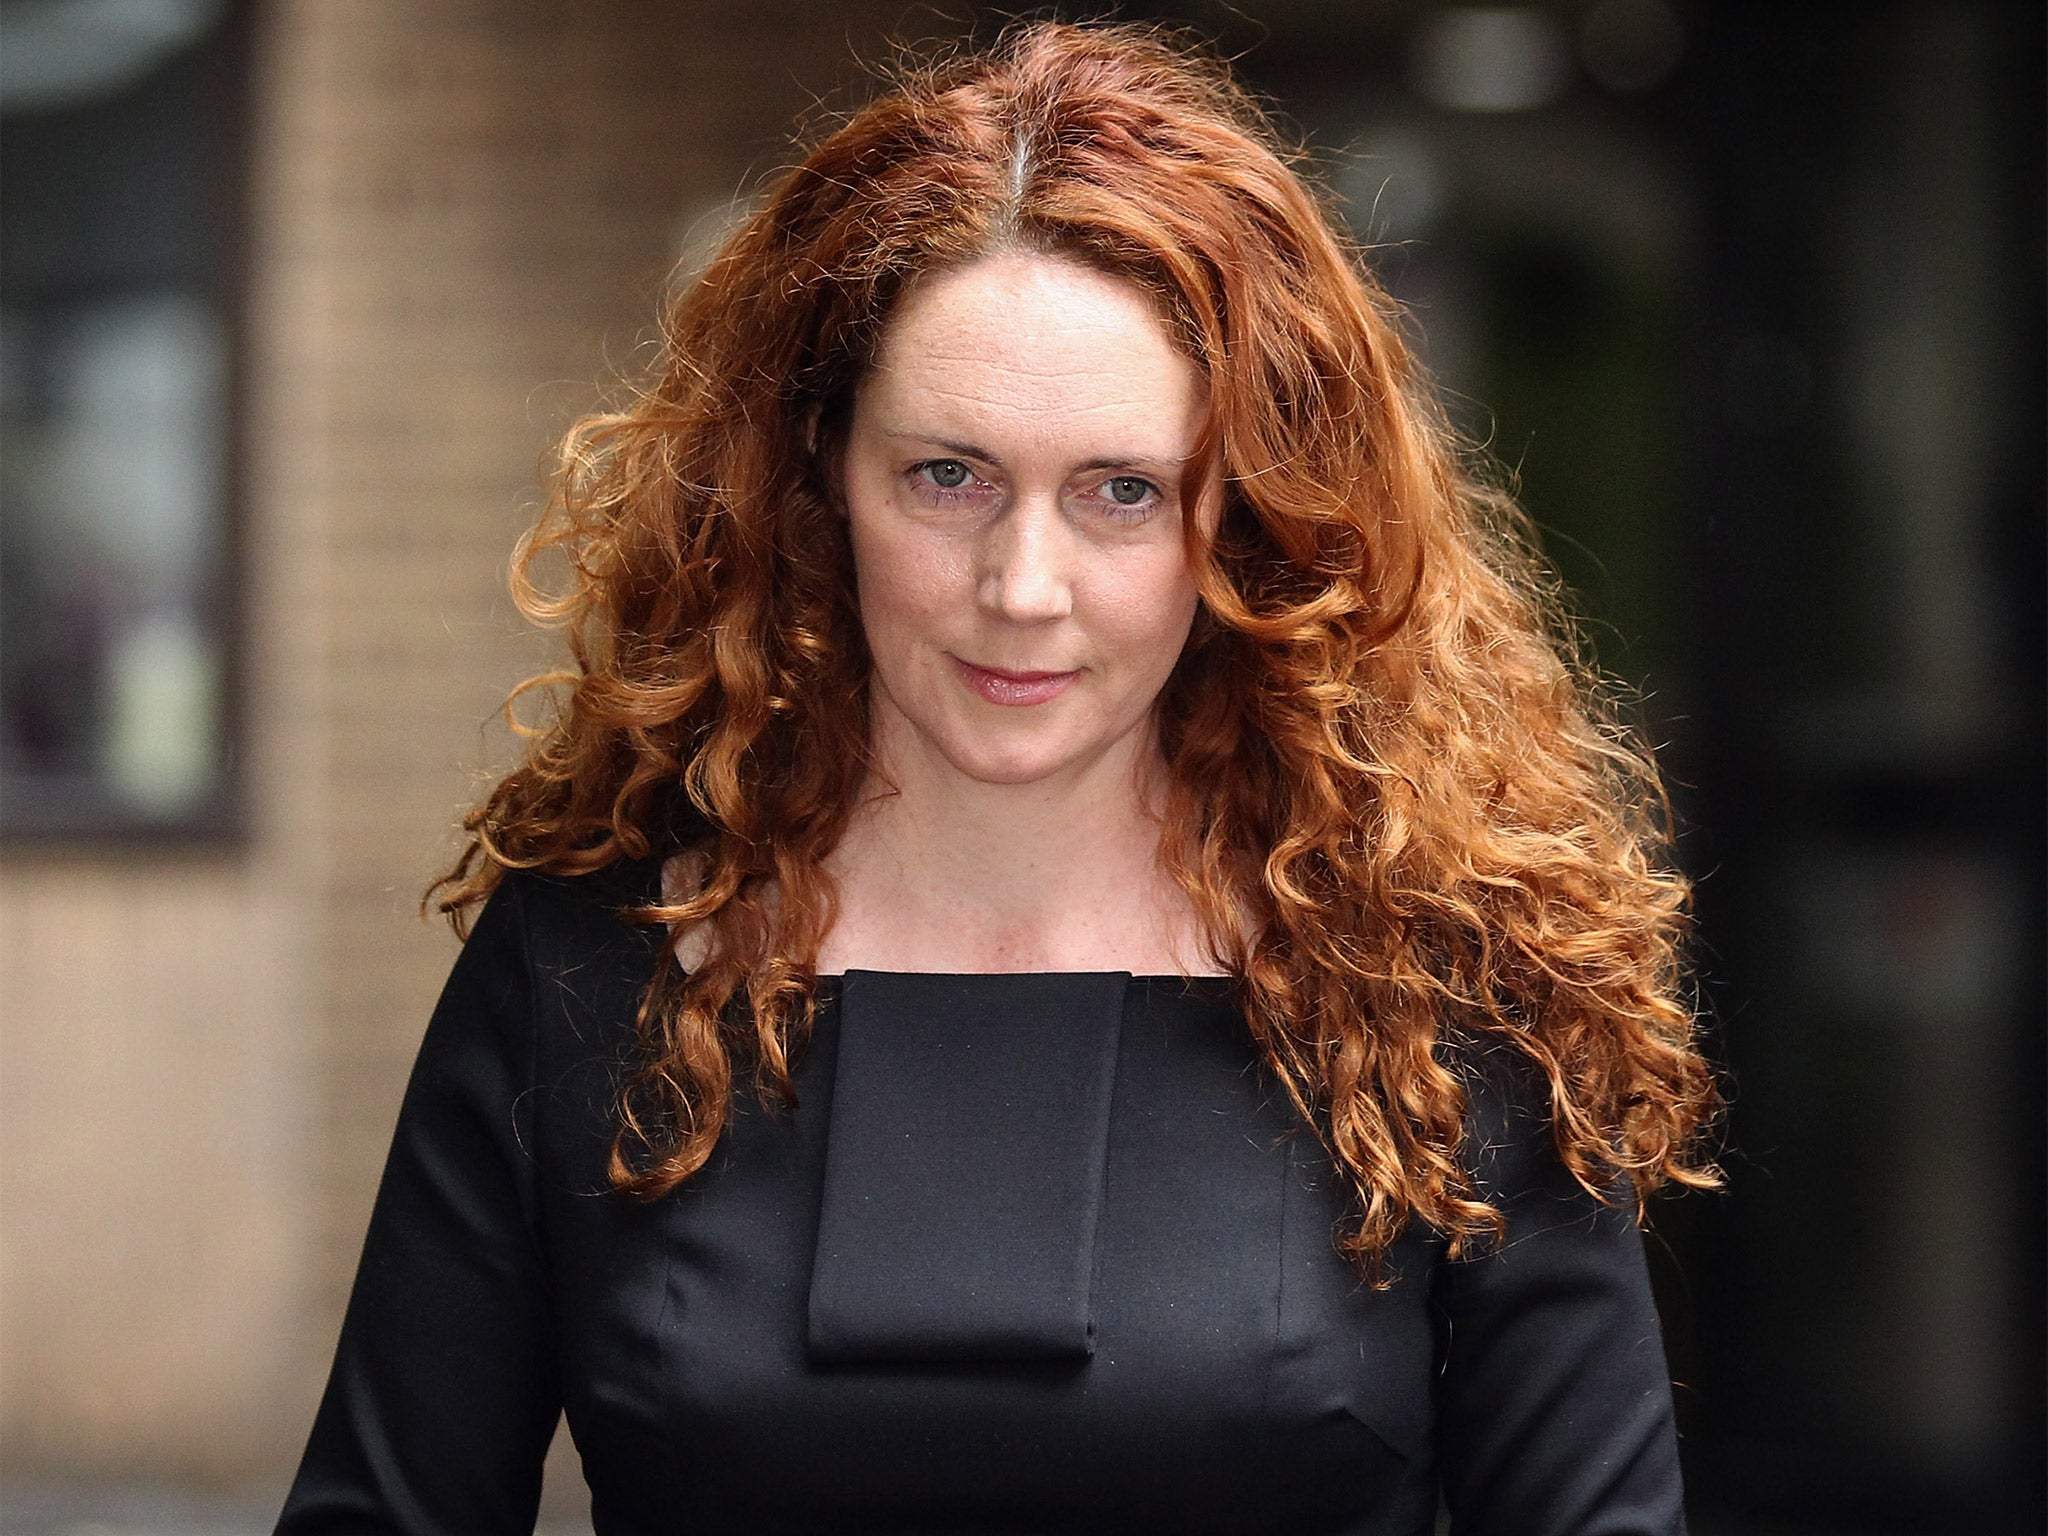 Rebekah Brooks, former chief executive of News International, at Southwark Crown Court in 2012; she was later cleared of making corrupt payments